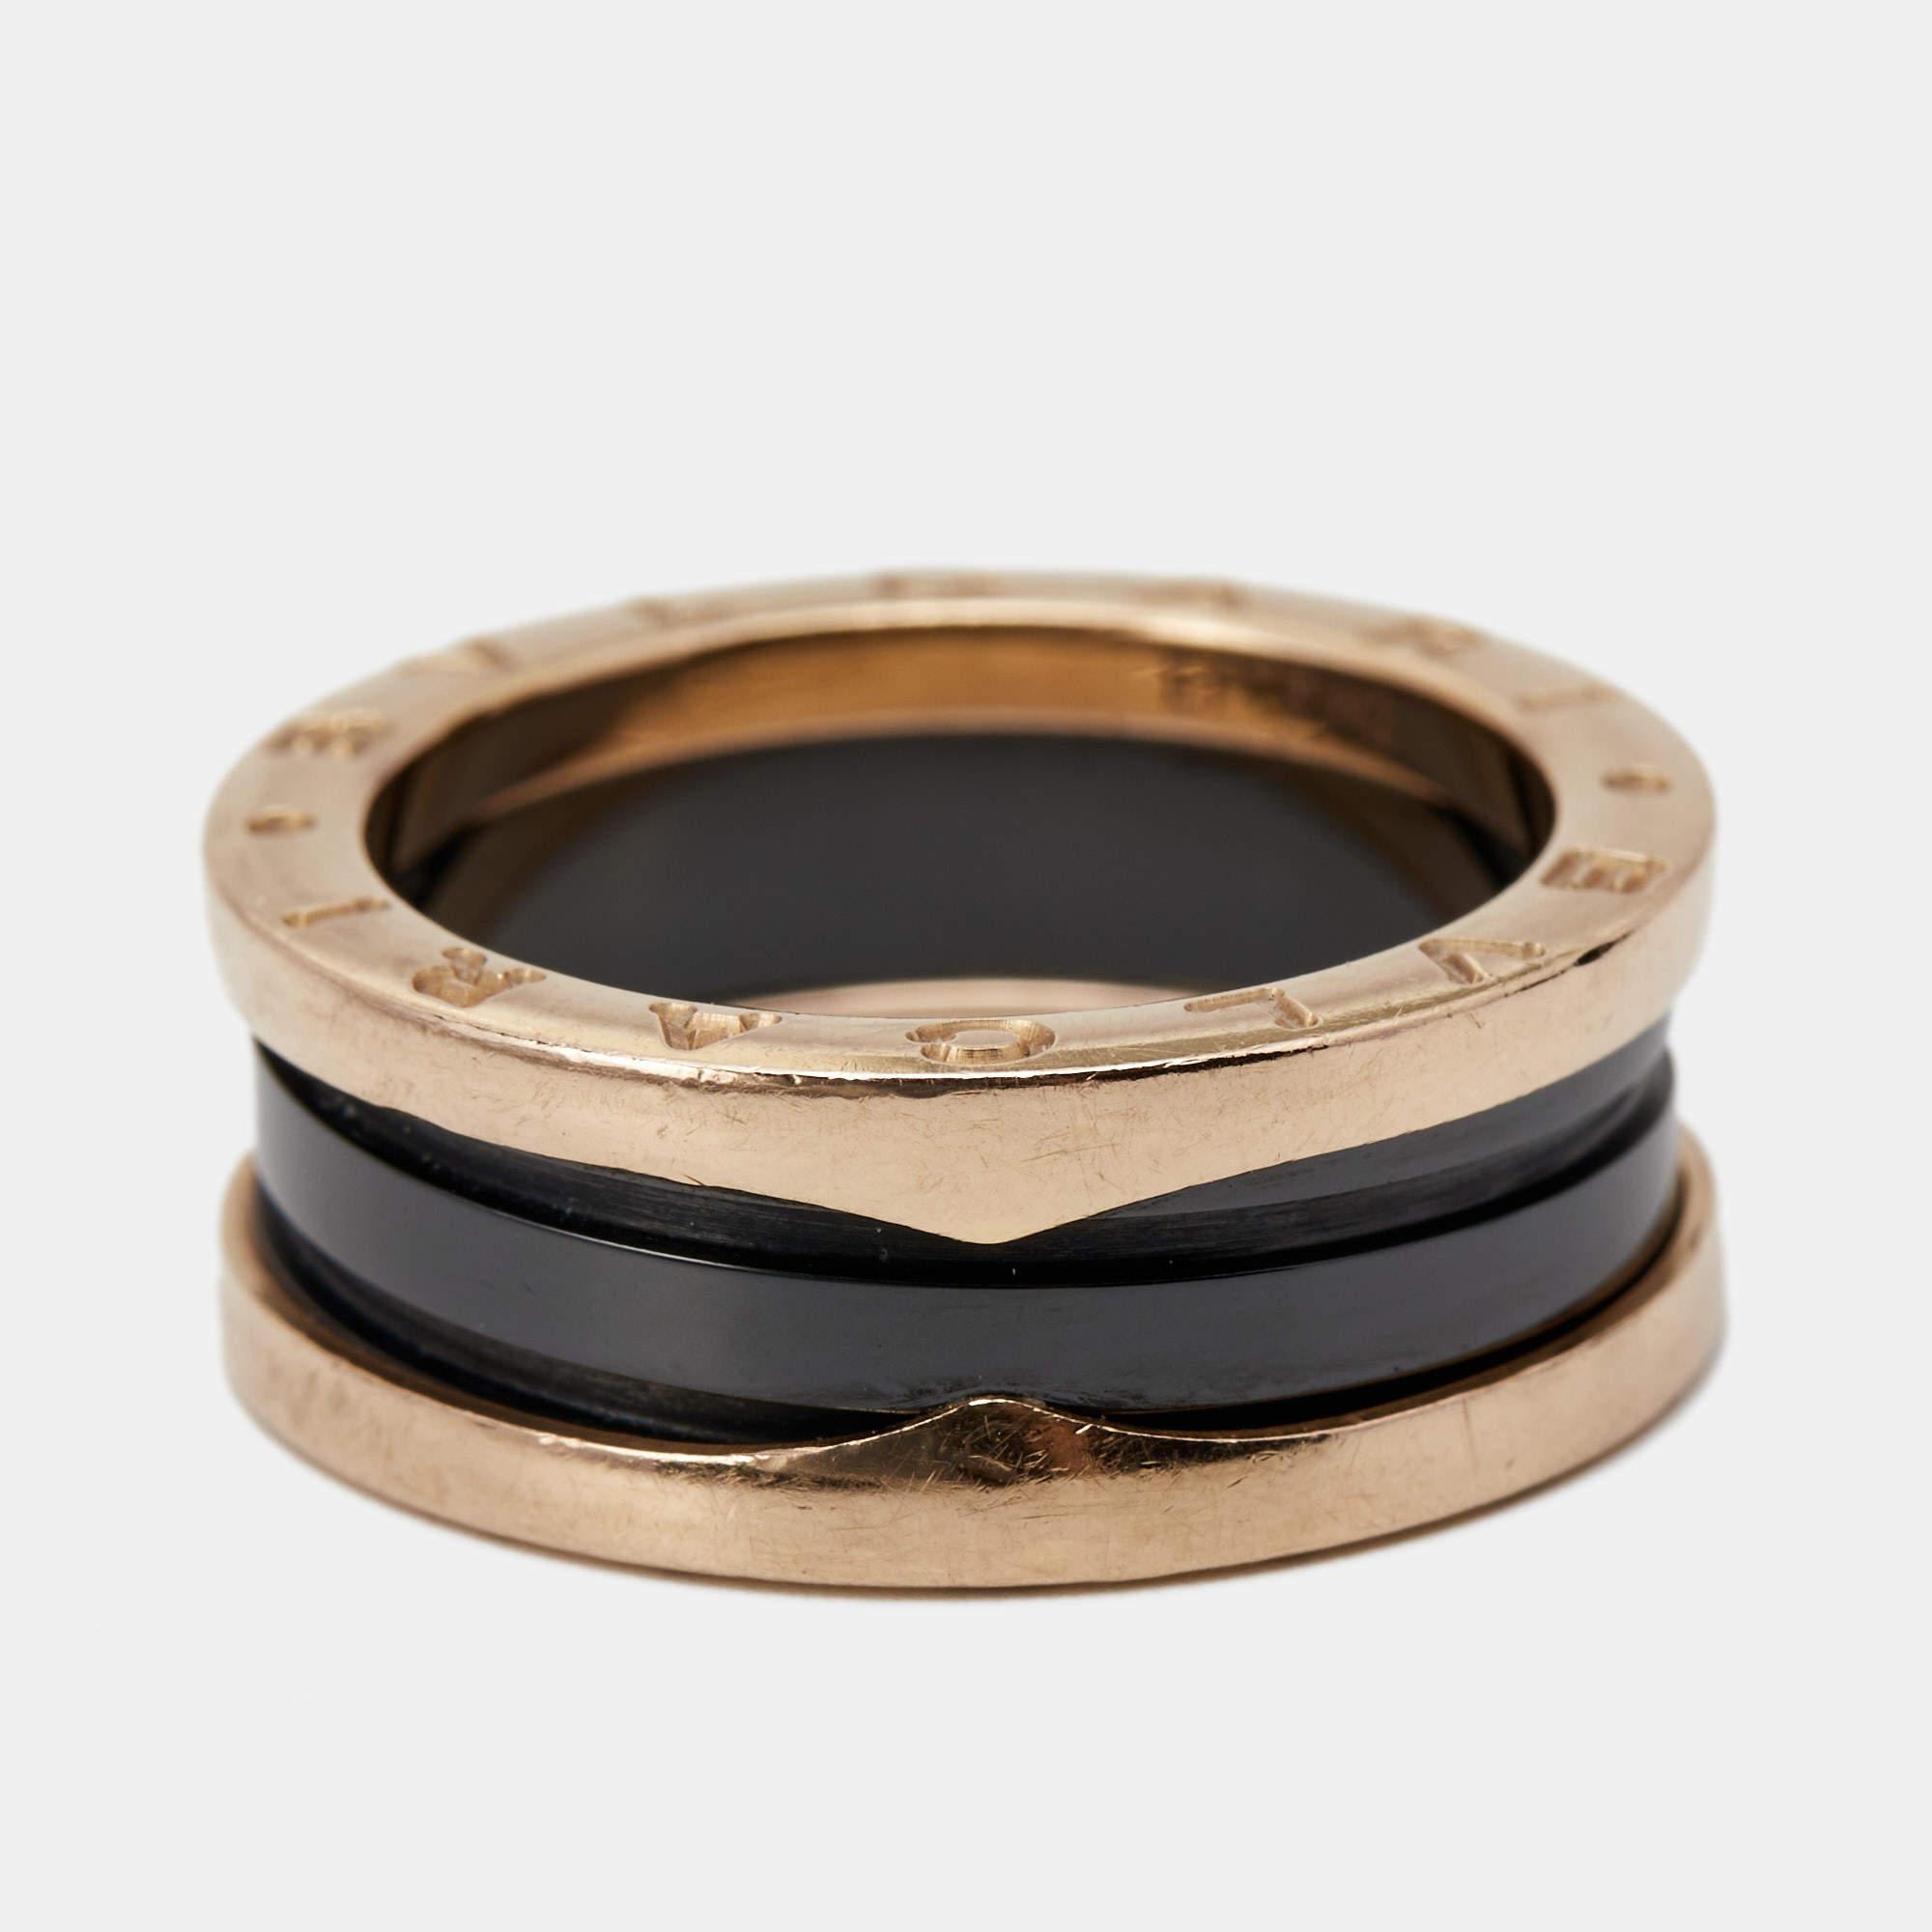 For the woman who has a refined taste in fine jewelry, Bvlgari brings her this immaculately crafted ring that has been made to be praised. Crafted from 18k rose gold, this Bvlgari B.Zero1 ring features two black ceramic bands stacked on one another.